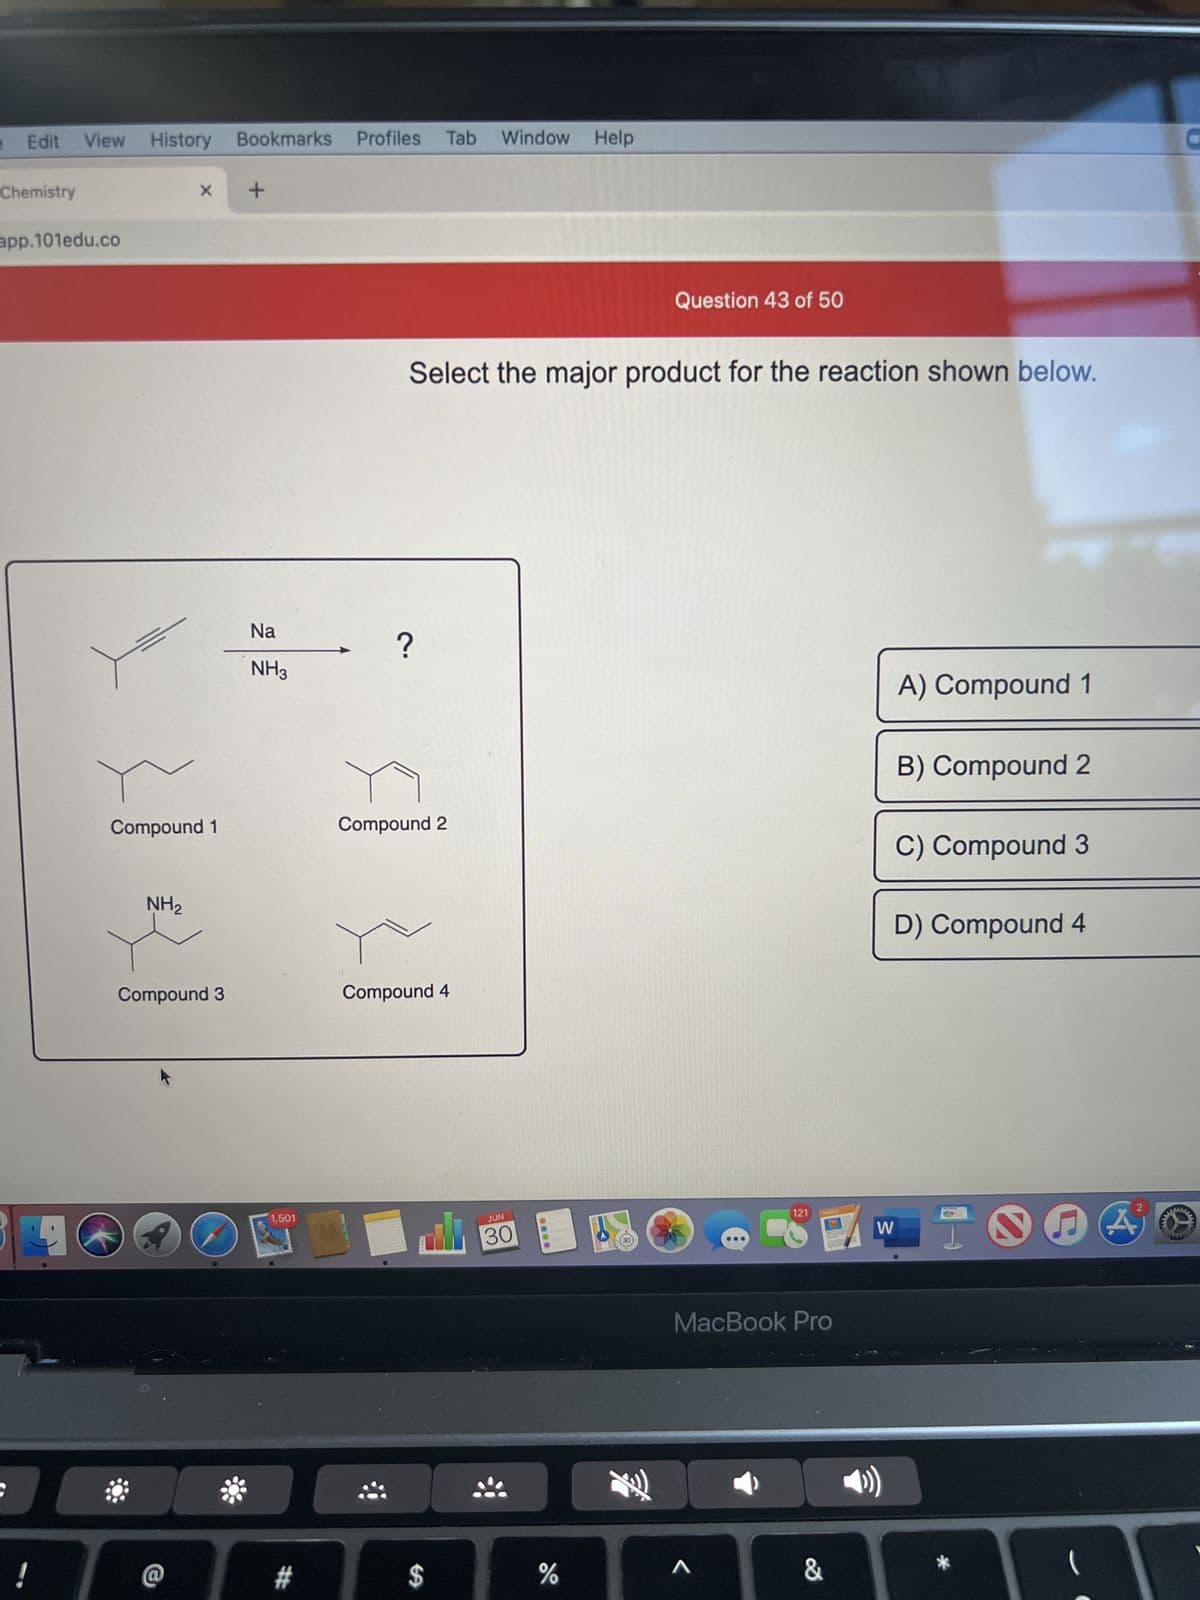 Edit View History Bookmarks Profiles Tab
Chemistry
app.101edu.co
!
9
X
Compound 1
NH₂
Compound 3
*
+
Na
NH3
1,501
#
?
Select the major product for the reaction shown below.
Compound 2
Compound 4
Window Help
$
JUN
30
0000
Question 43 of 50
%
121
A
PAGES
MacBook Pro
&
W
4))
A) Compound 1
B) Compound 2
C) Compound 3
D) Compound 4
*
2
F A
(
M